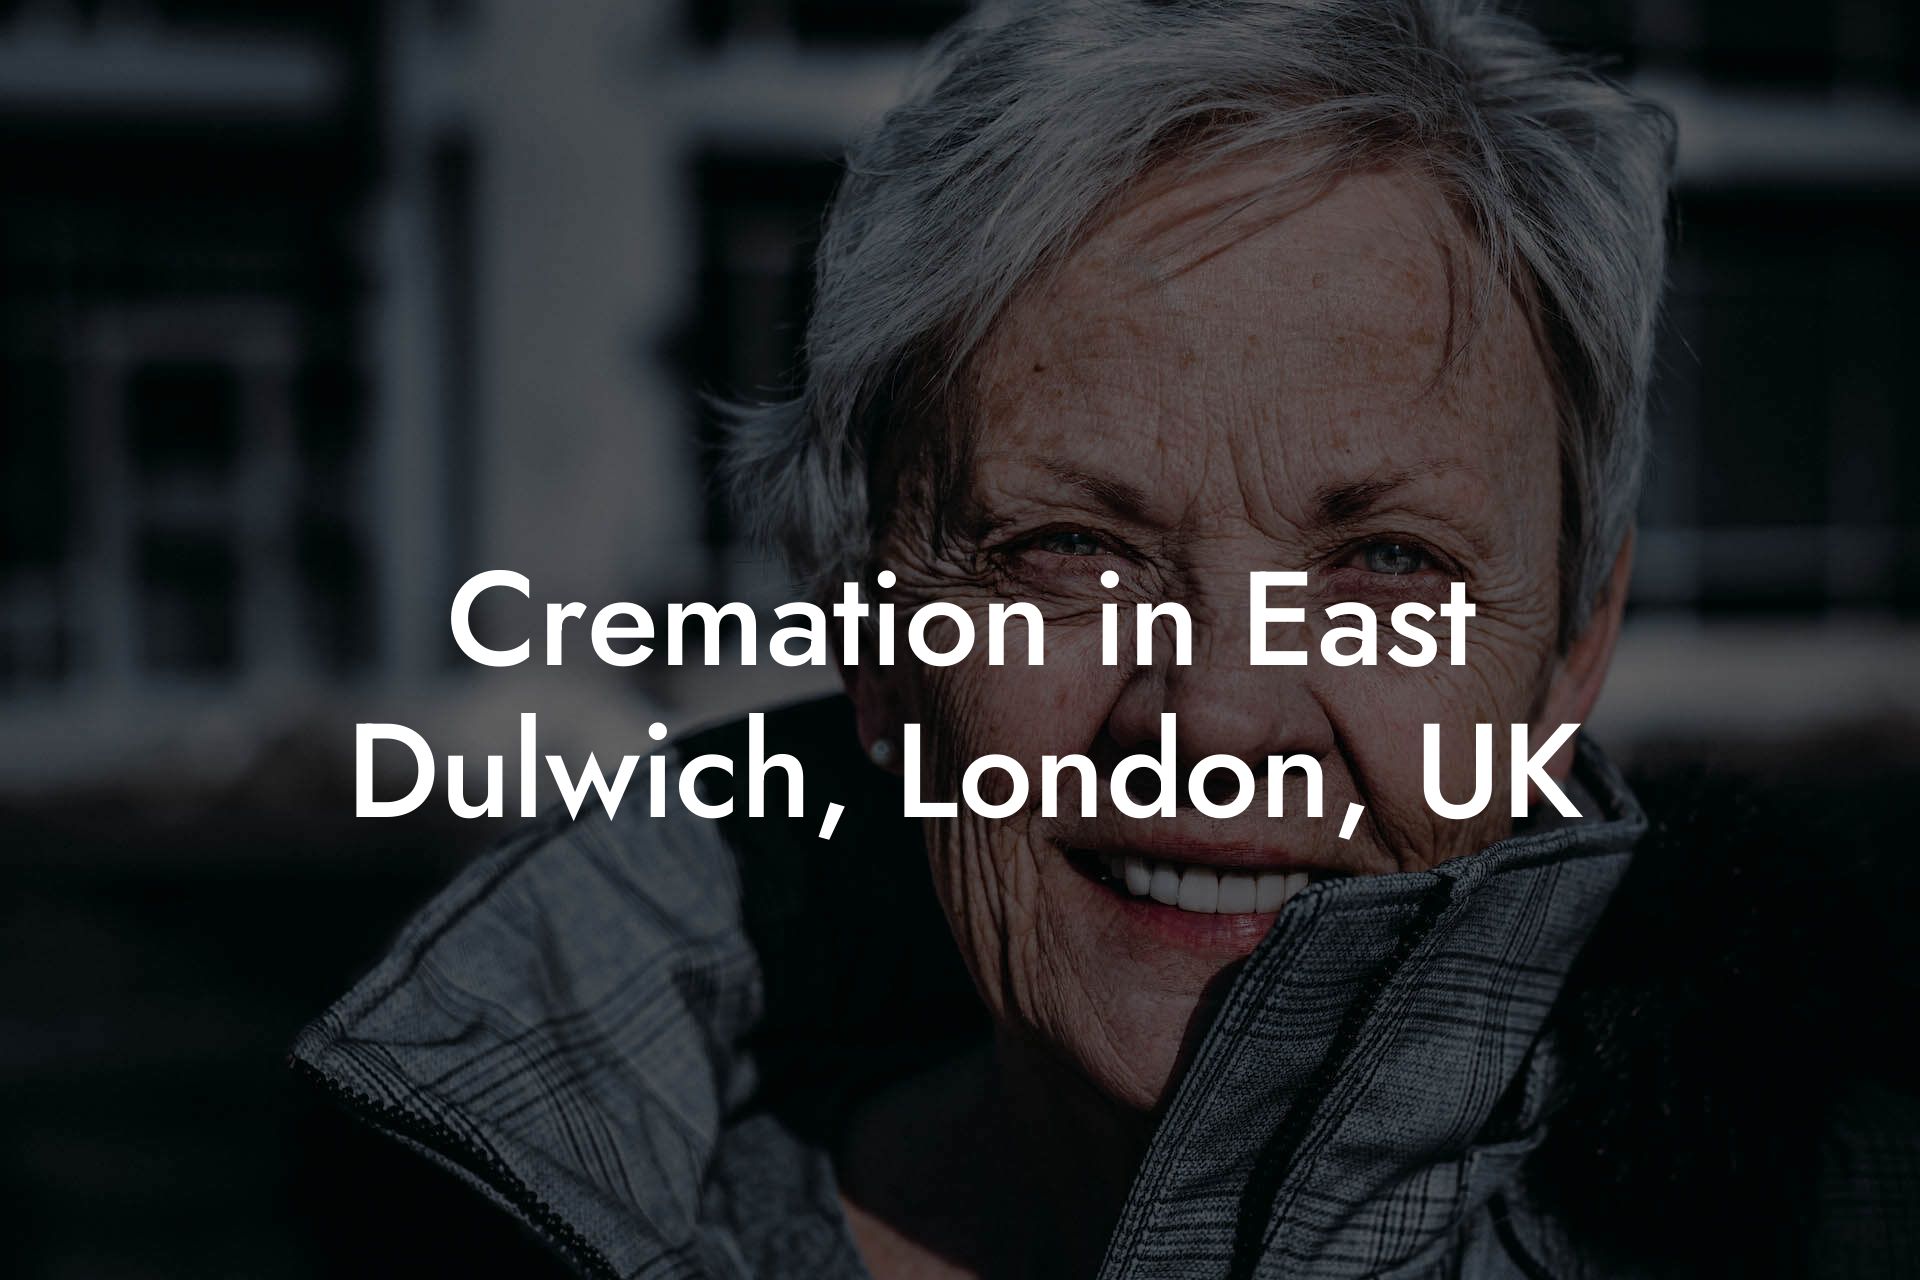 Cremation in East Dulwich, London, UK